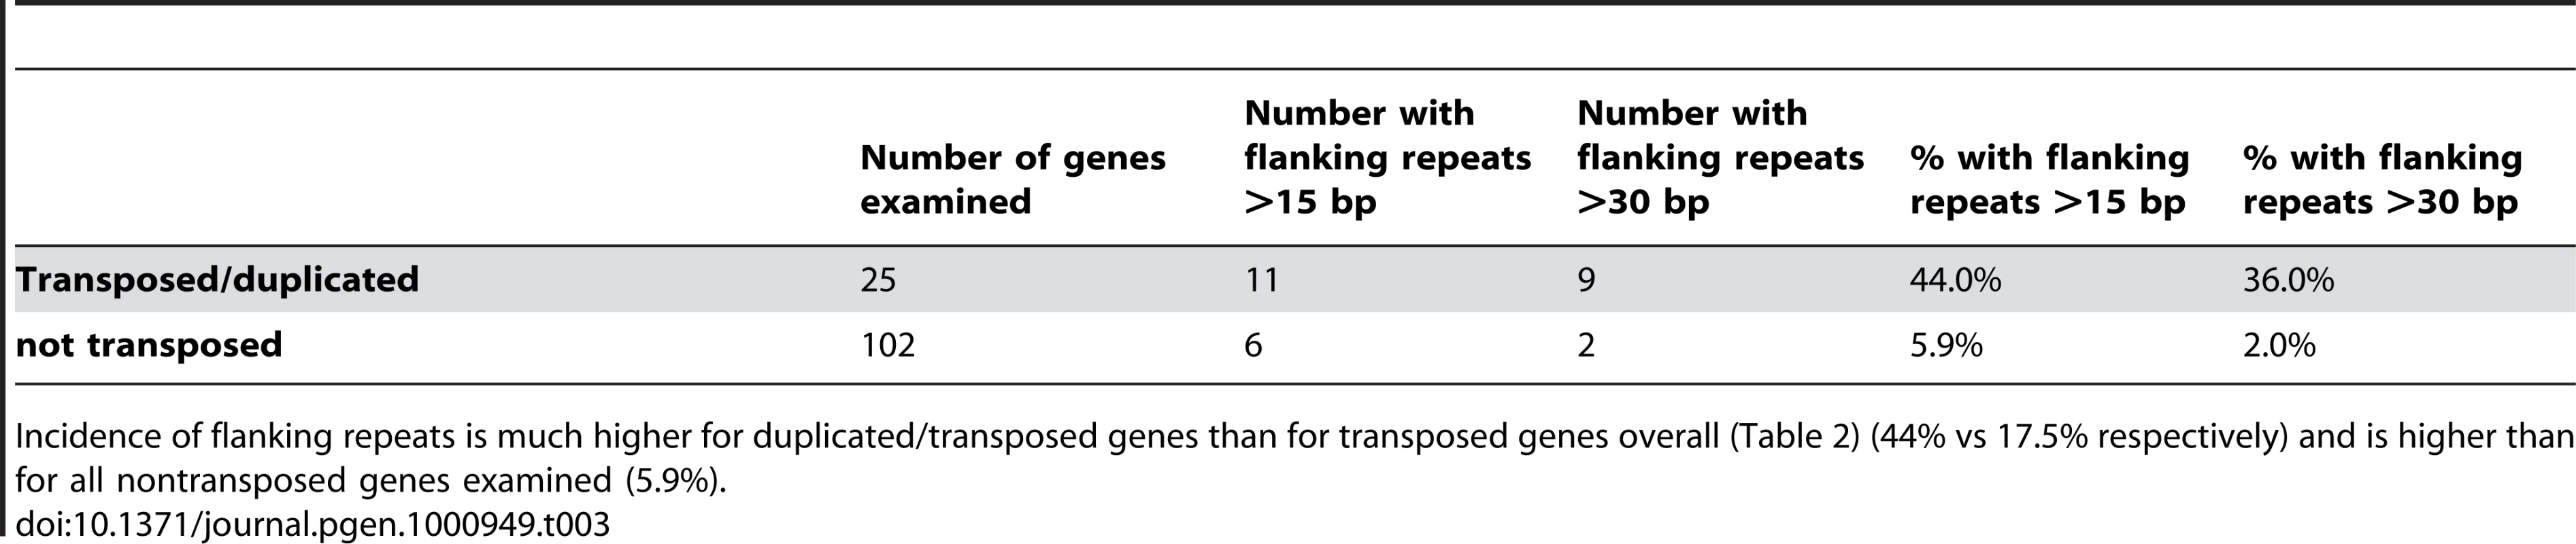 Flanking repeat frequency for transposed genes with a best noncoding hit versus non-transposed genes.